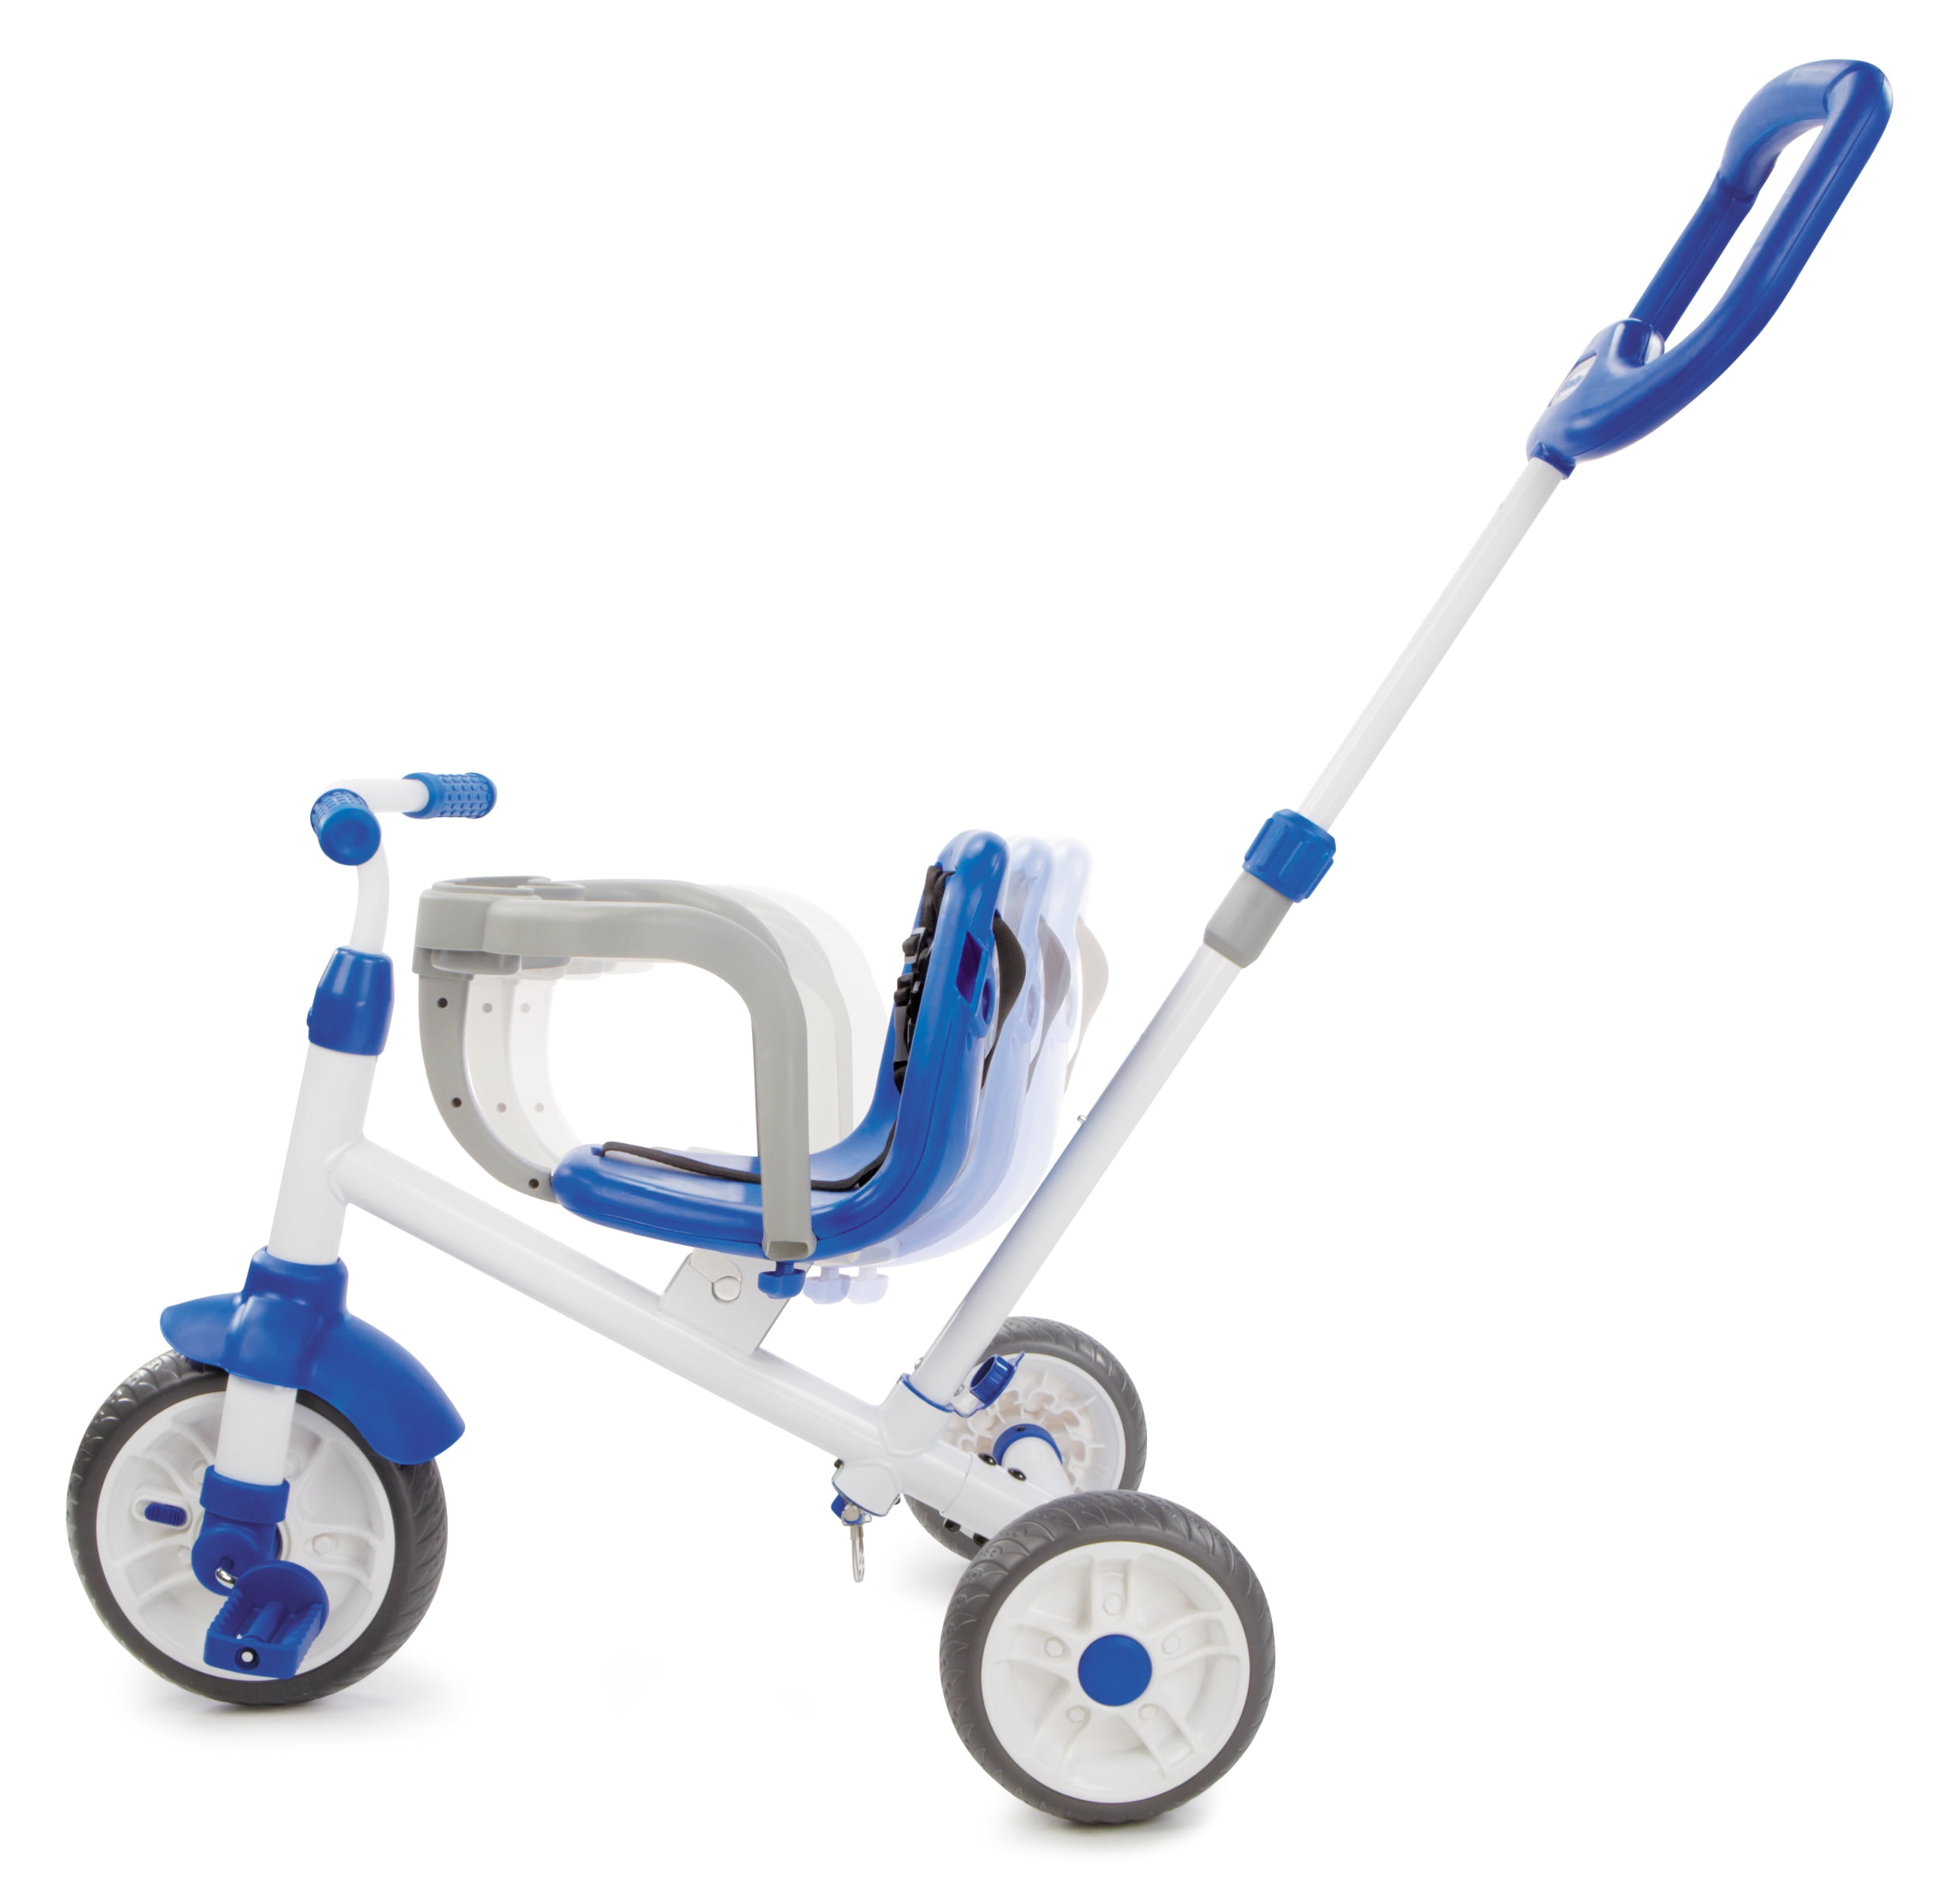 Toddlers in Growth Blue, with Little for Girls Tricycle \'N Ride Old For 9 Months Years 3 of to Convertible - Tikes 3 Boys Kids Learn Stages Trike 3-in-1